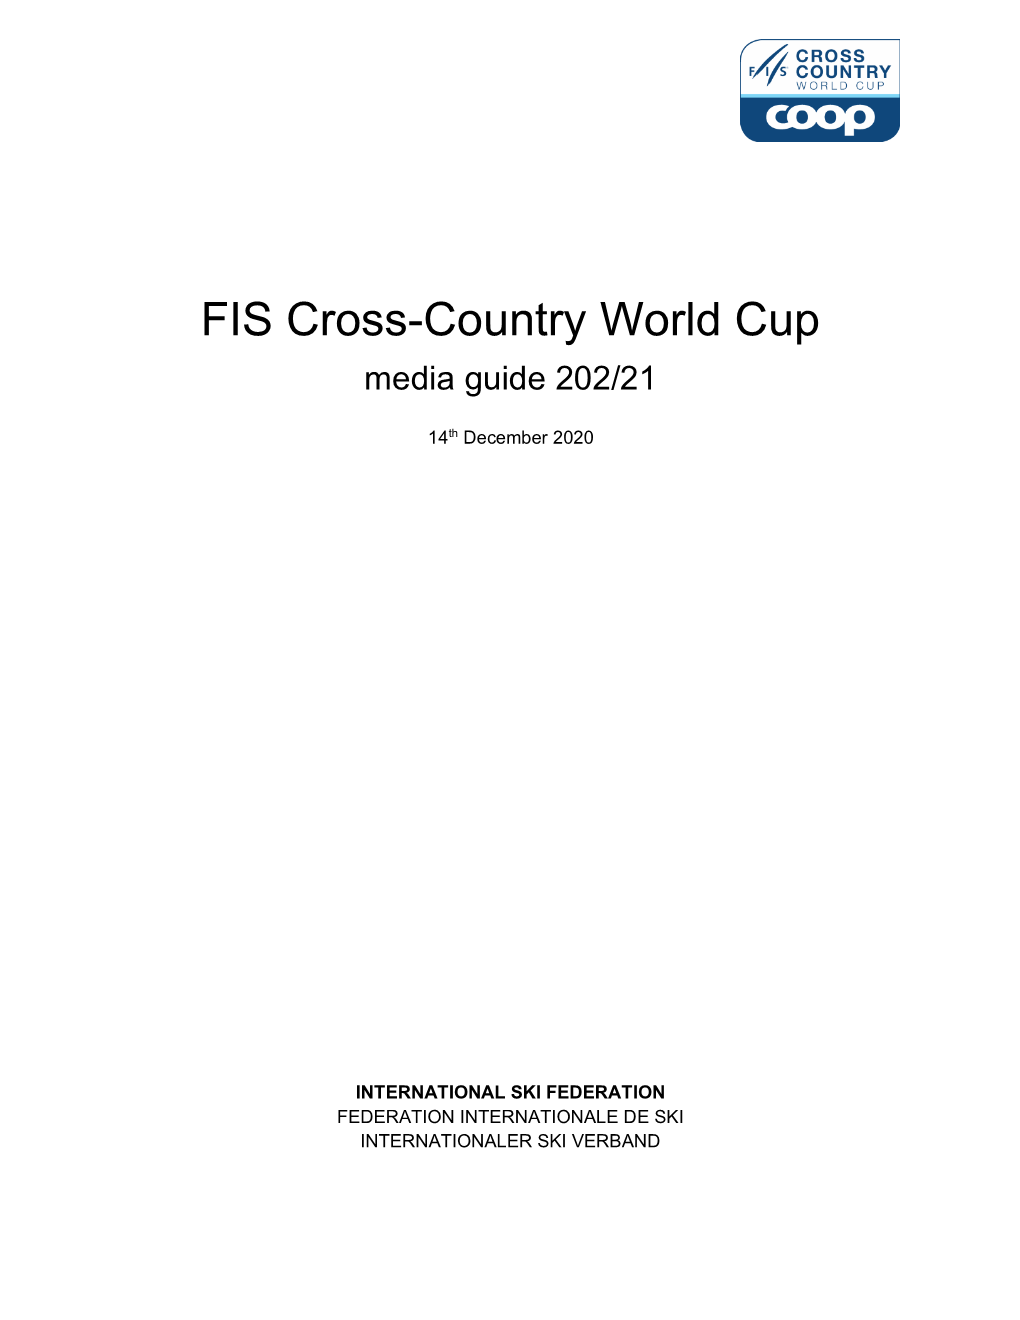 FIS Cross-Country World Cup Media Guide 202/21